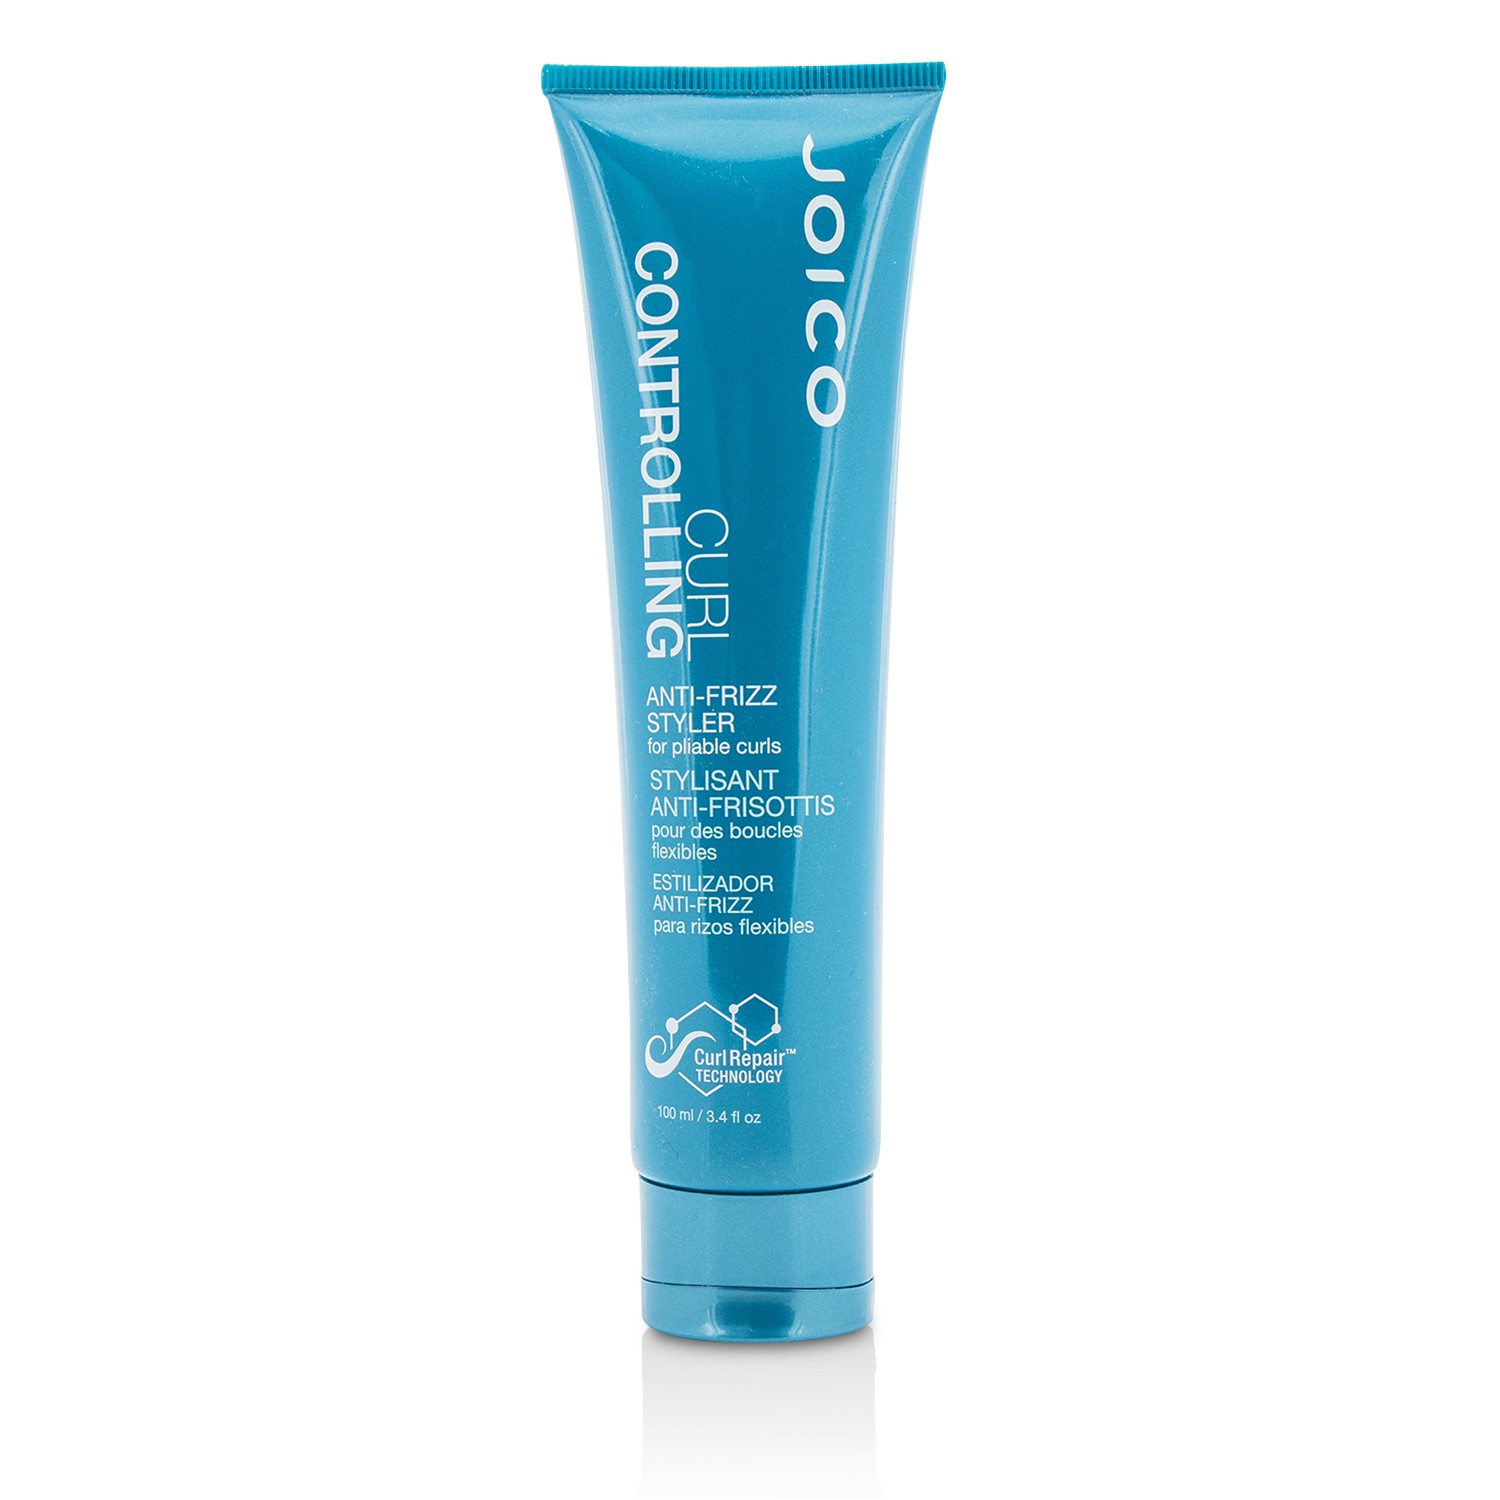 Curl Controlling Anti-Frizz Styler (For Pliable Curls) Joico Image